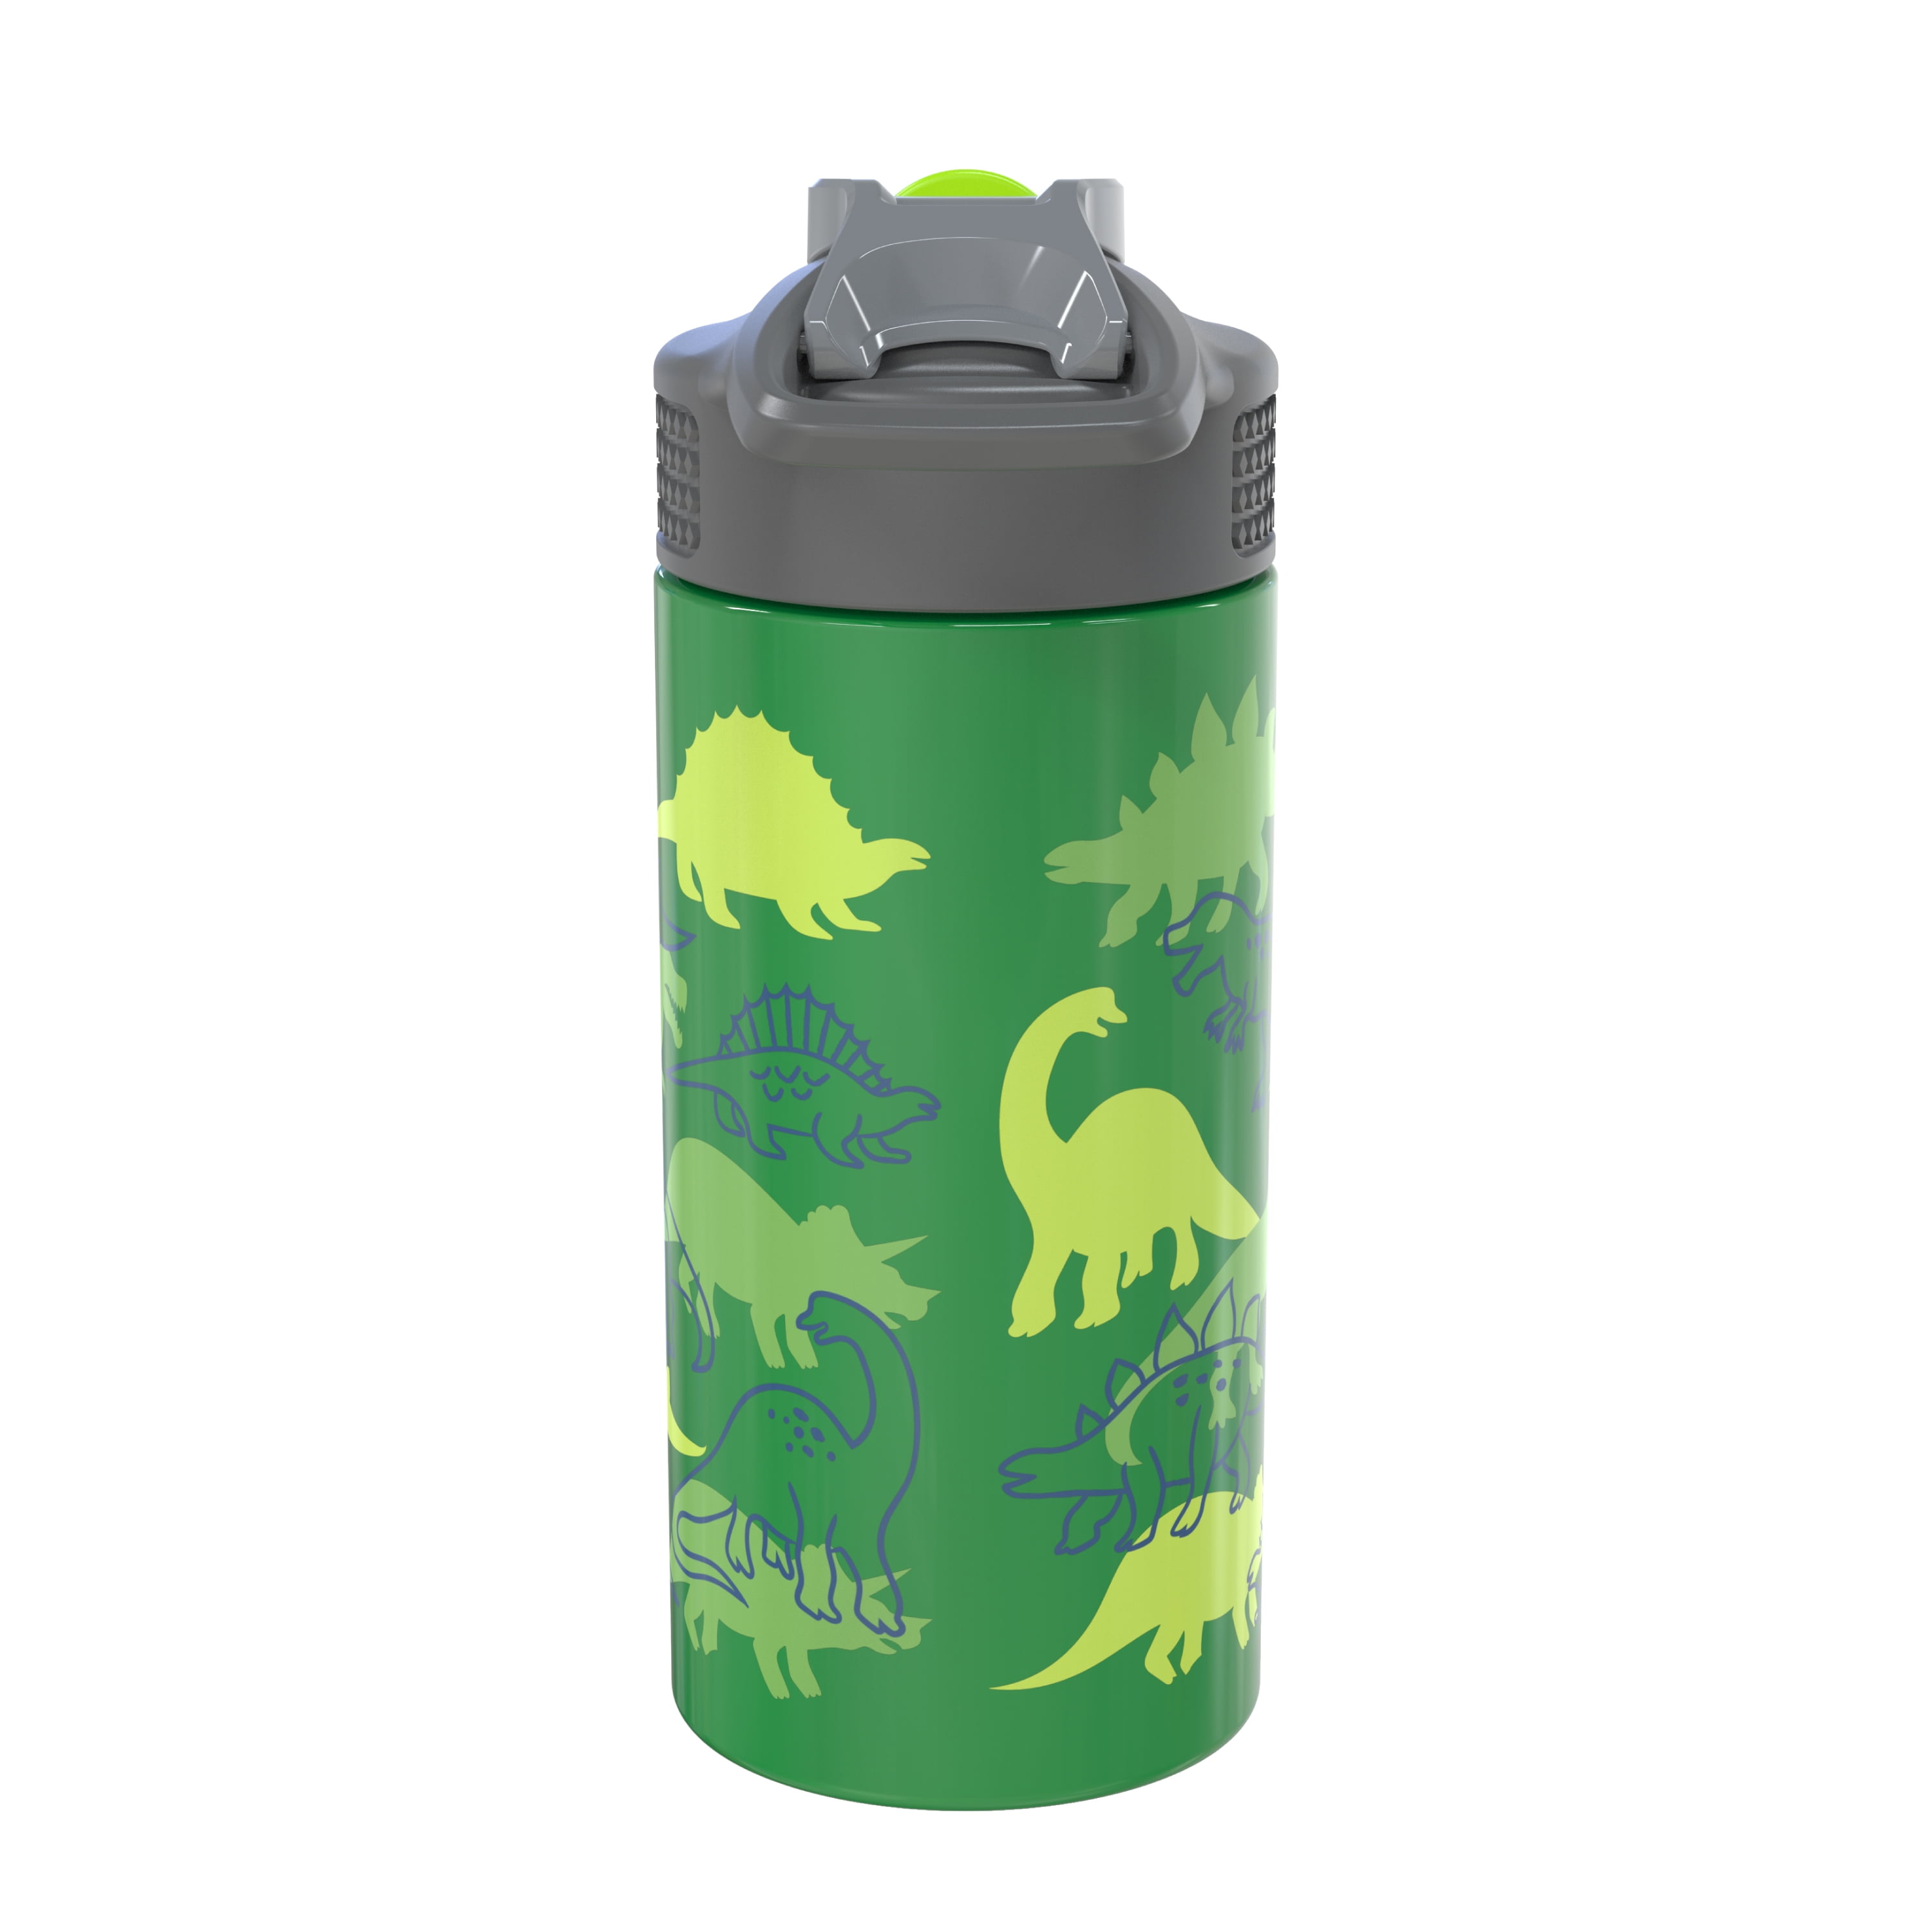 Zak Designs 16oz Riverside Kids Water Bottle with Spout Cover and Built-in  Carrying Loop, Made of Durable Plastic, Leak-Proof Design for Travel (Dino